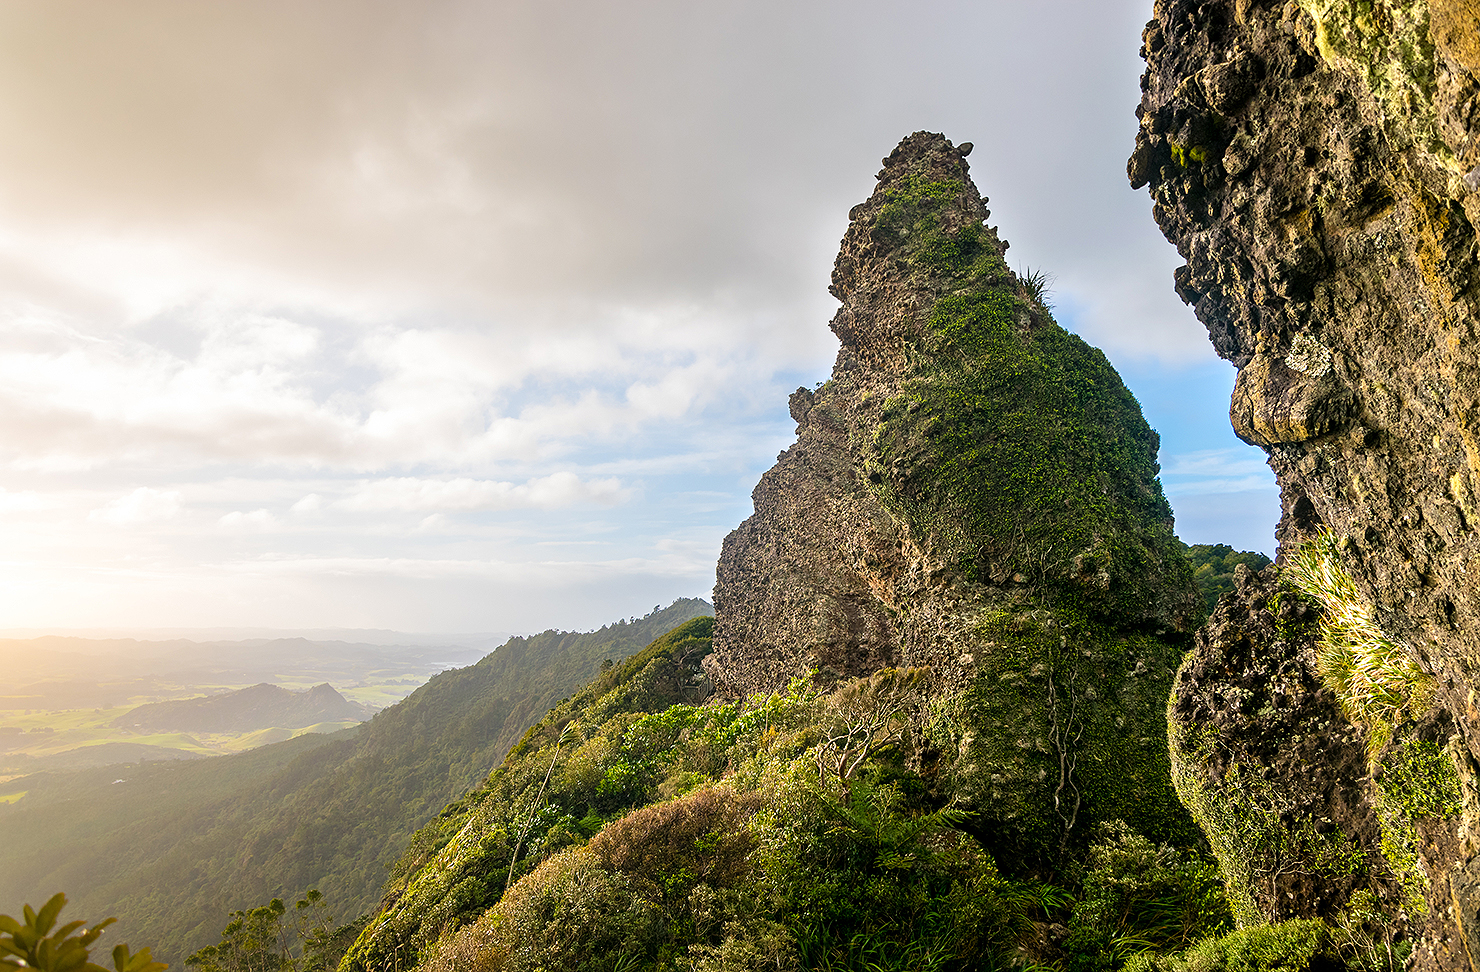 A close up view of Whangarei heads (Mount Manaia) New Zealand.